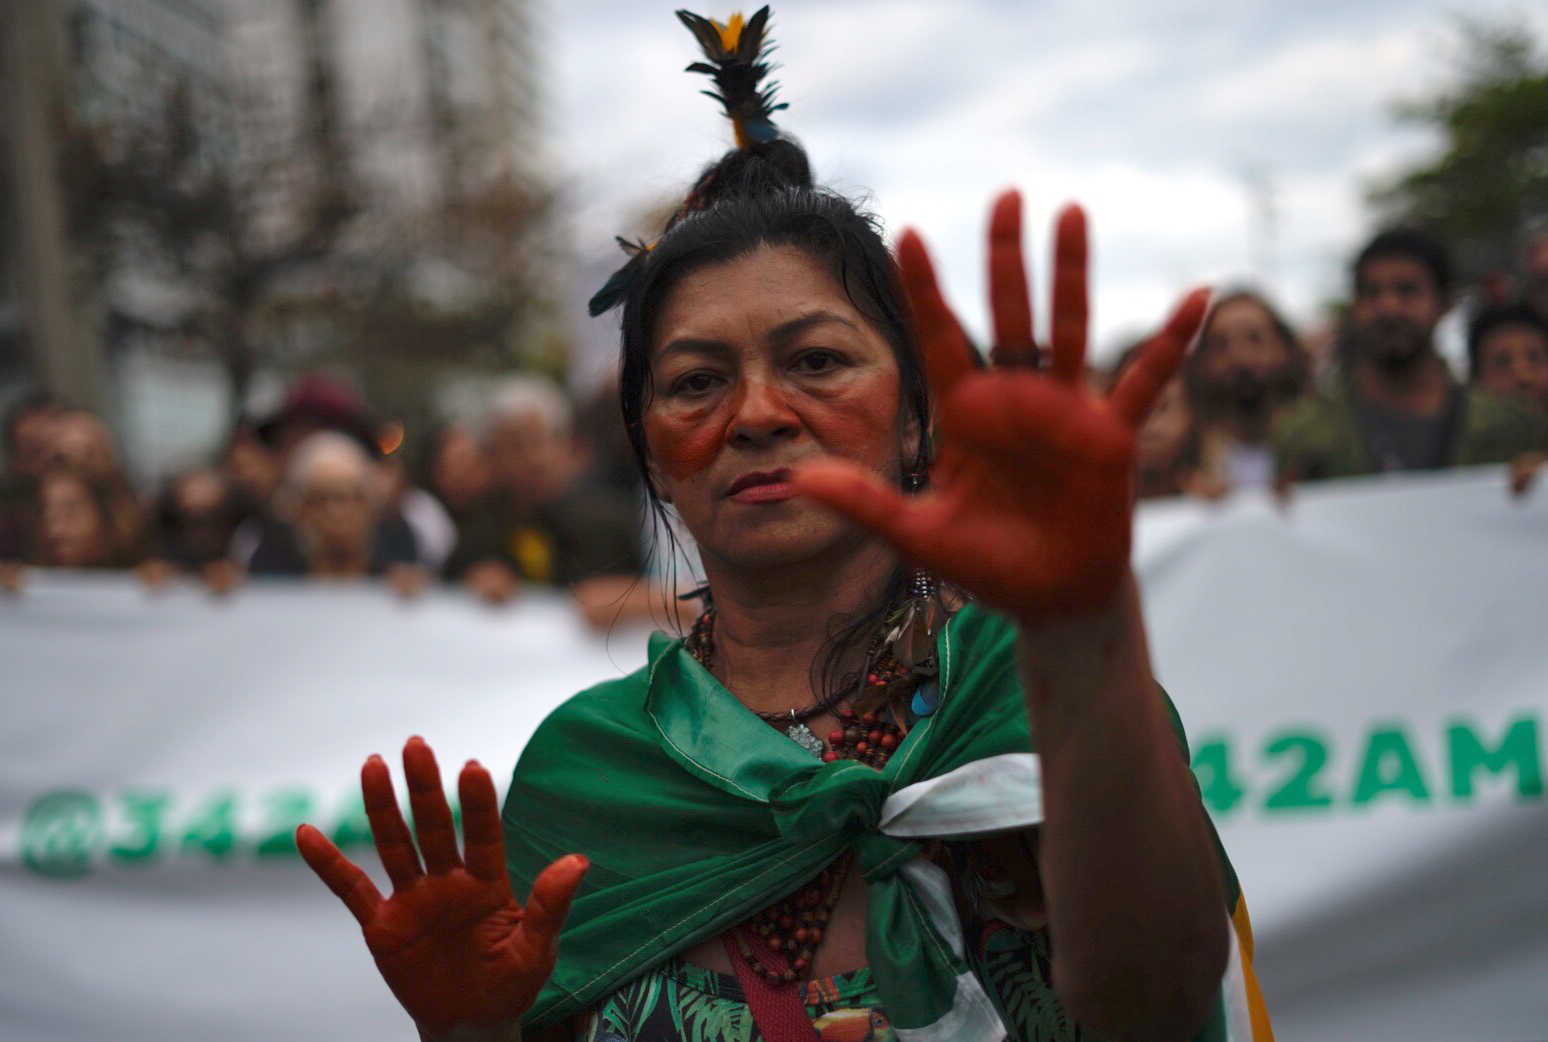 An activist takes part in a protest against the destruction of the Amazon rainforest, at Ipanema Beach in Rio de Janeiro, Brazil, on Aug. 25, 2019. (Mauro Pimentel—AFP/Getty Images)